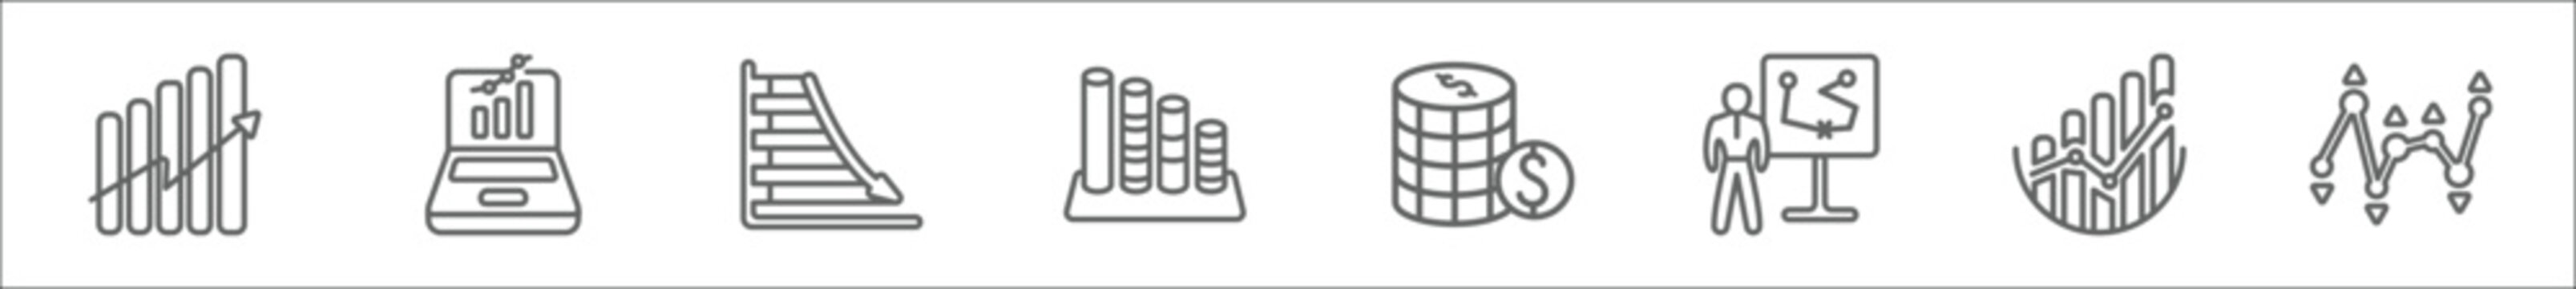 outline set of business line icons. linear vector icons such as ascendant graph, laptop analysis, data analytics descendant graphic, cylindrical data graphic, one dollar coins, person explaining